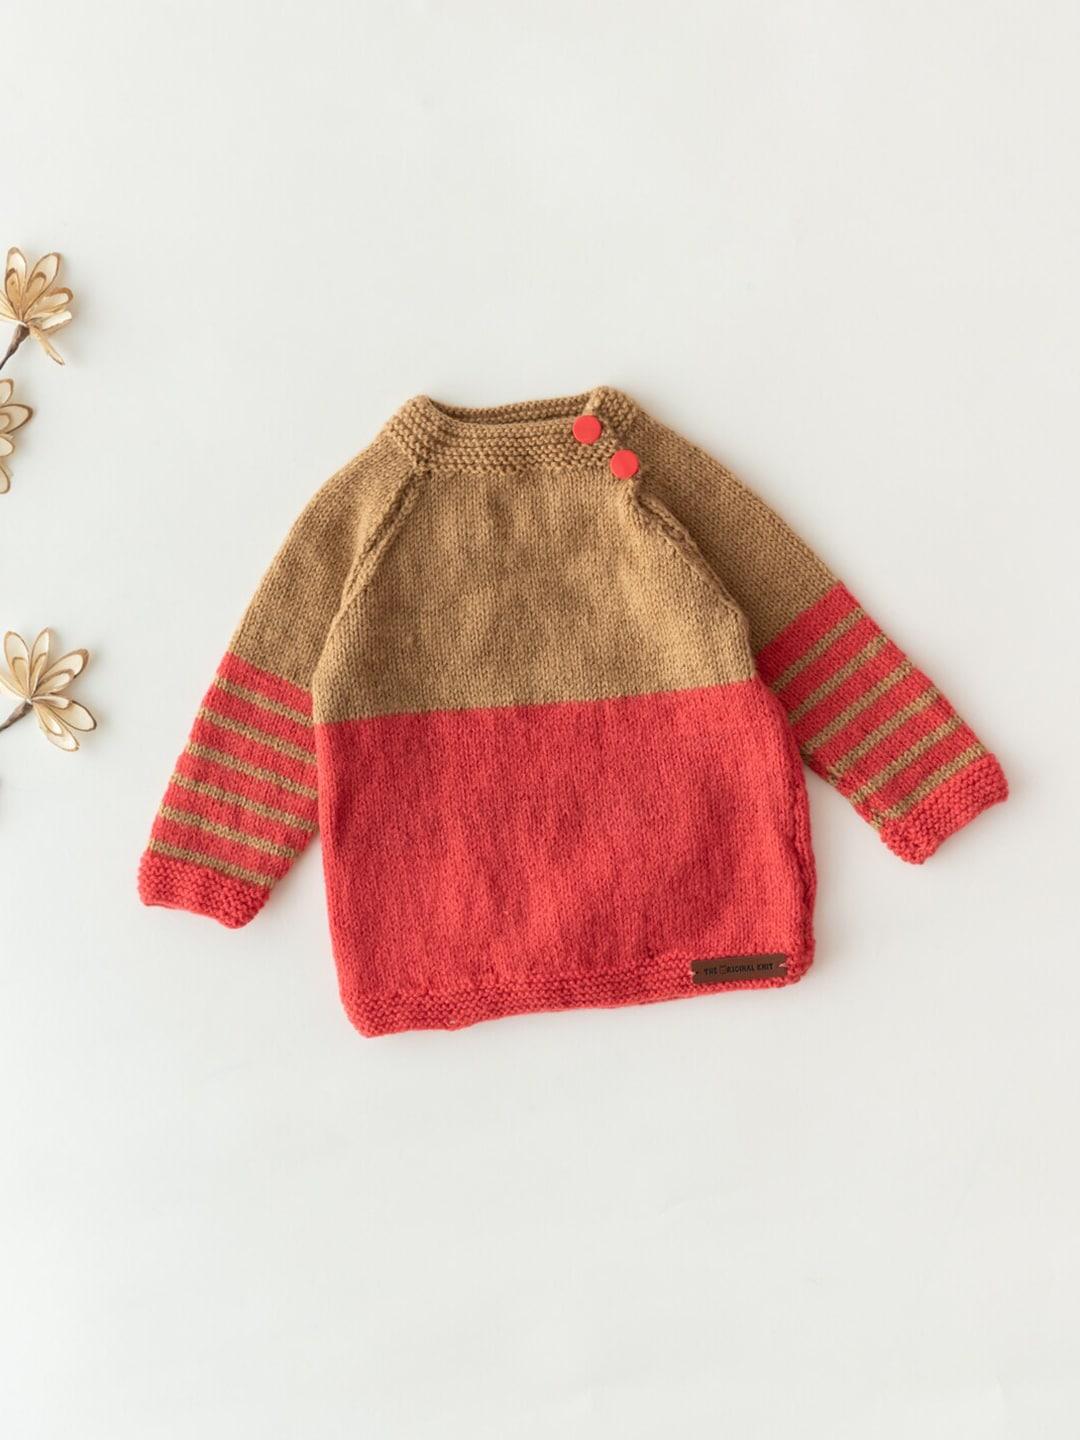 The Original Knit Infants Colourblocked Acrylic Pullover Sweater